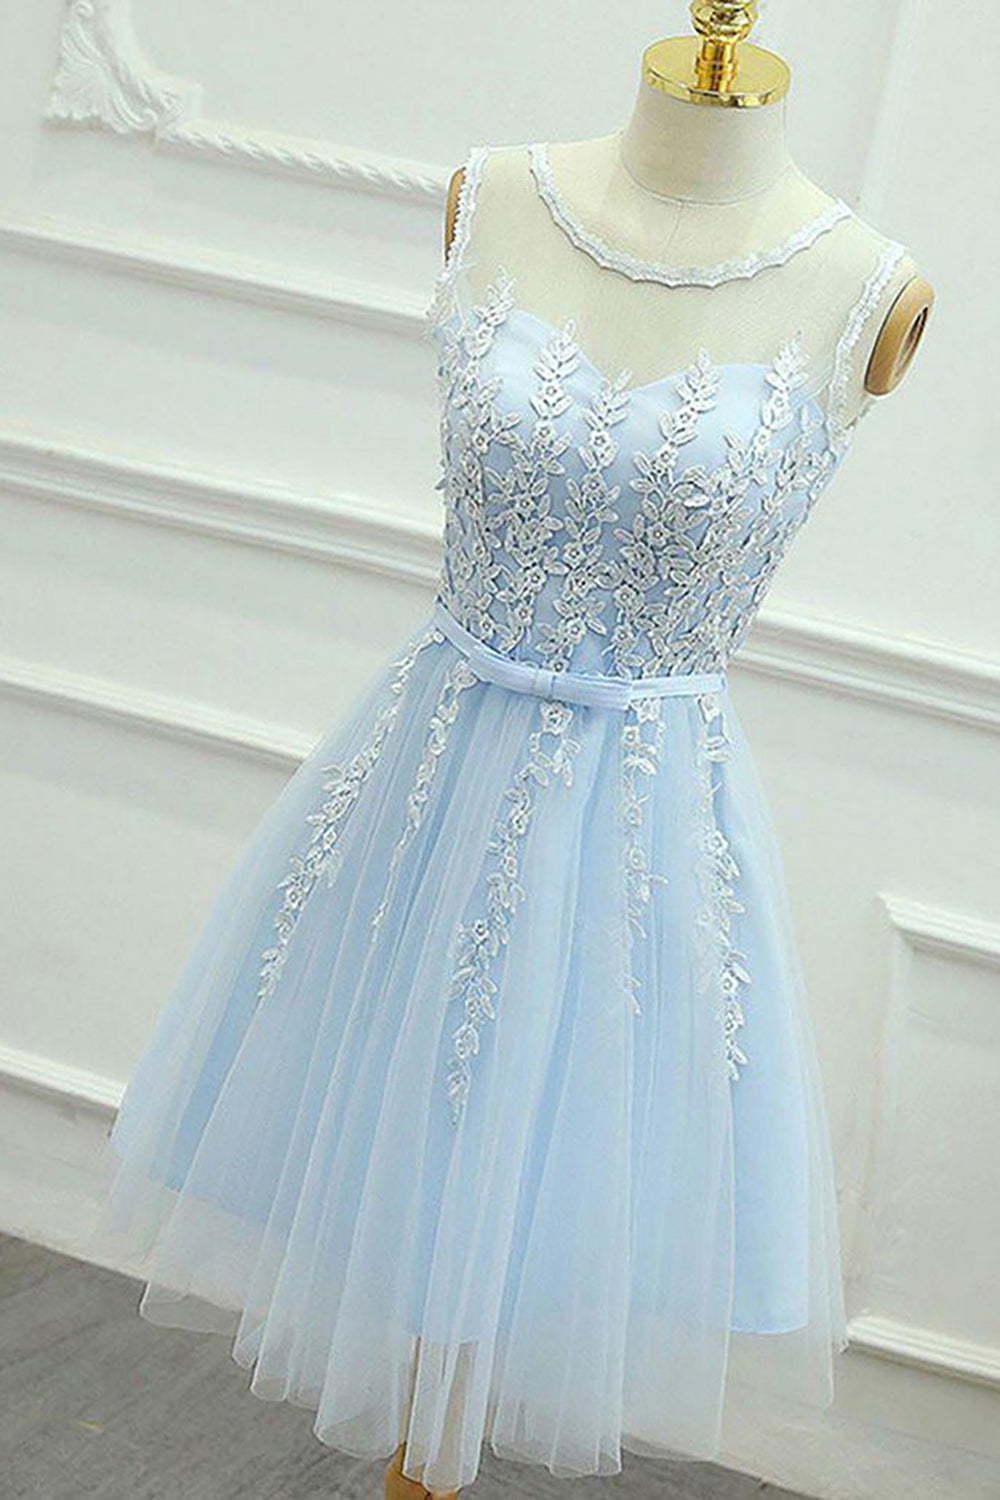 Blue Round Neck A Line Corset Homecoming Dress outfit, Homecoming Dress Lace